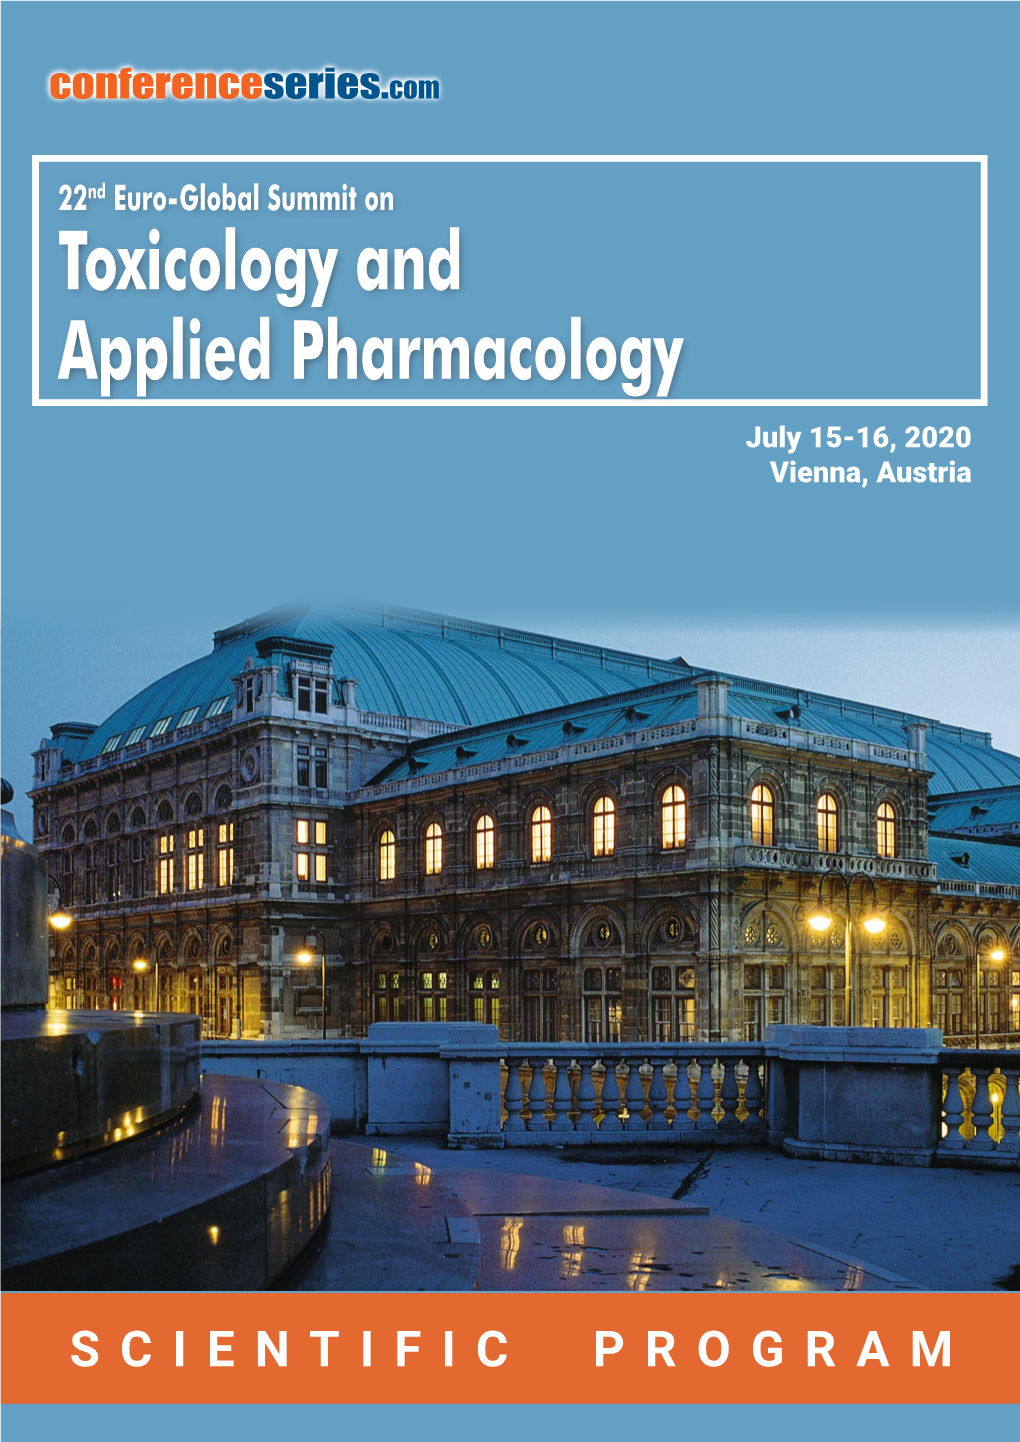 Toxicology and Applied Pharmacology July 15-16, 2020 Vienna, Austria